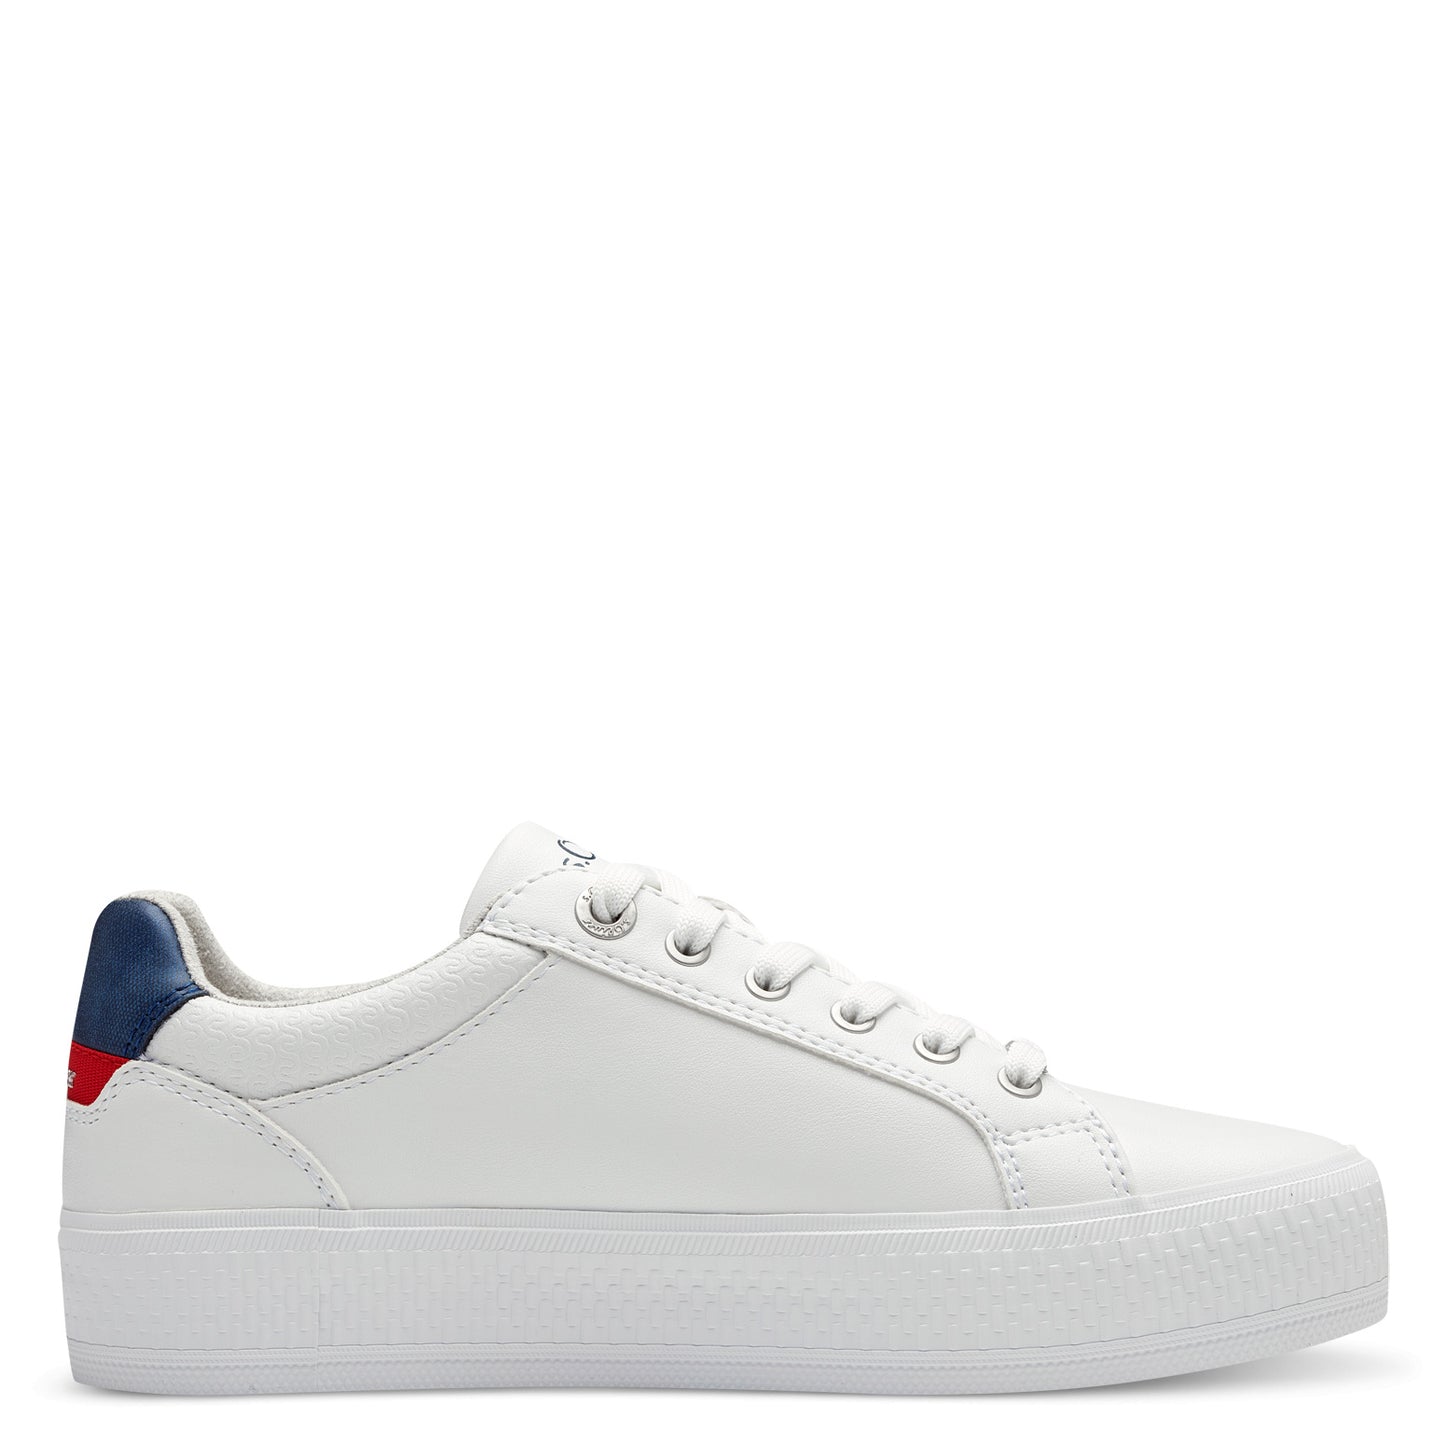 S.oliver - Ladies Shoes Trainers White, Navy (1910)